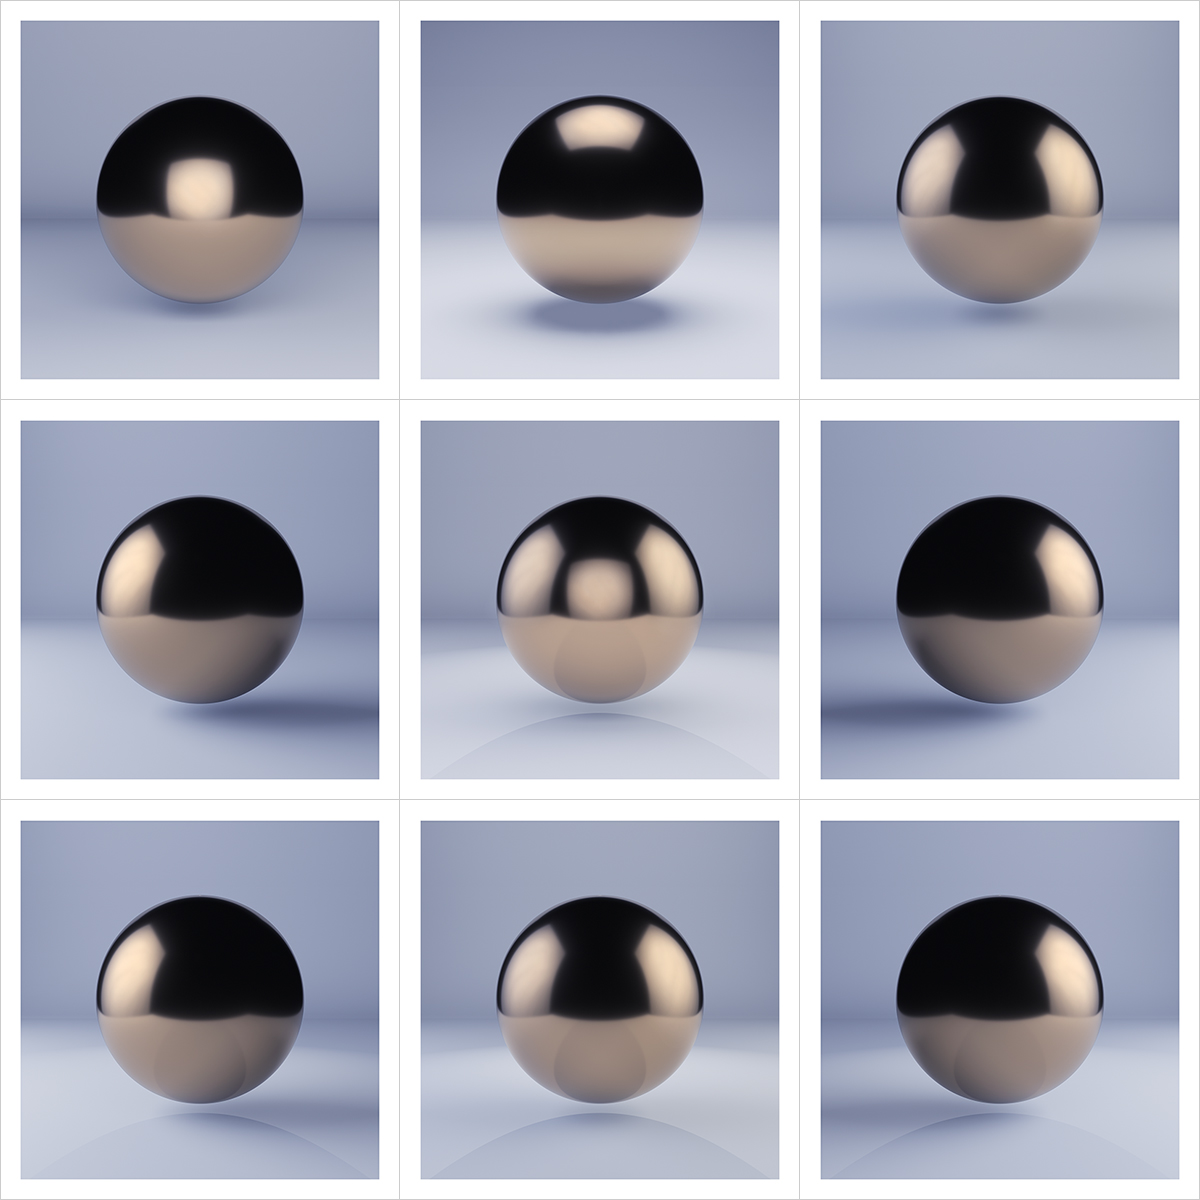 2018 041 A sphere lit from the top V1 000 - 2018 - A sphere lit from the top, four sides and some of their combinations. V1. (Nine Months of Sol Lewitt's Life)